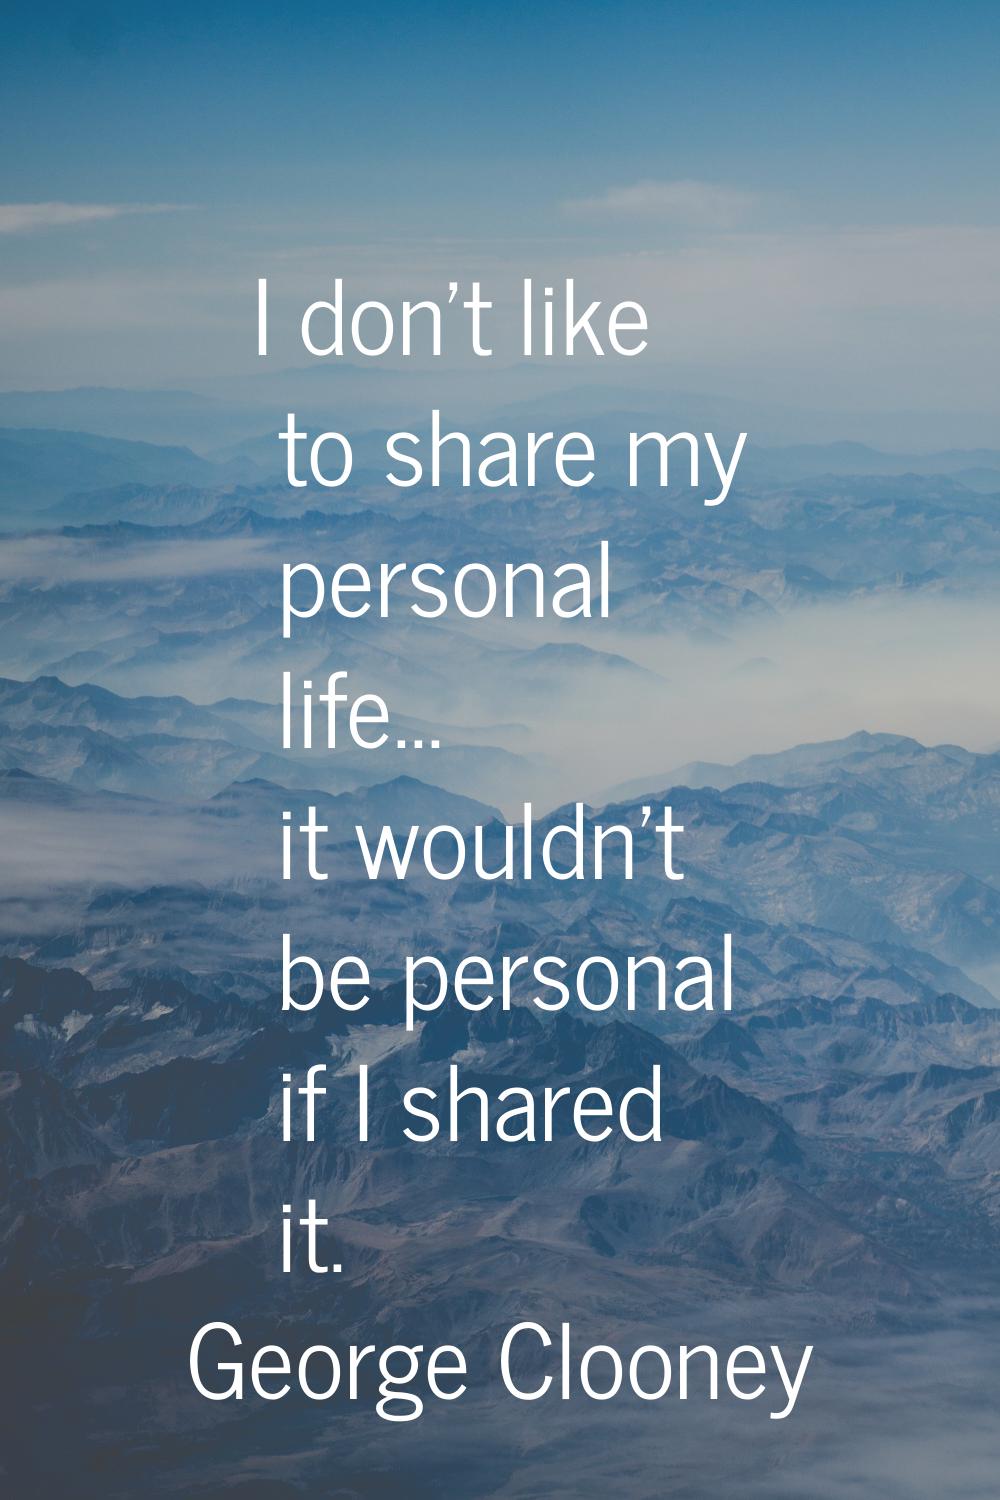 I don't like to share my personal life... it wouldn't be personal if I shared it.